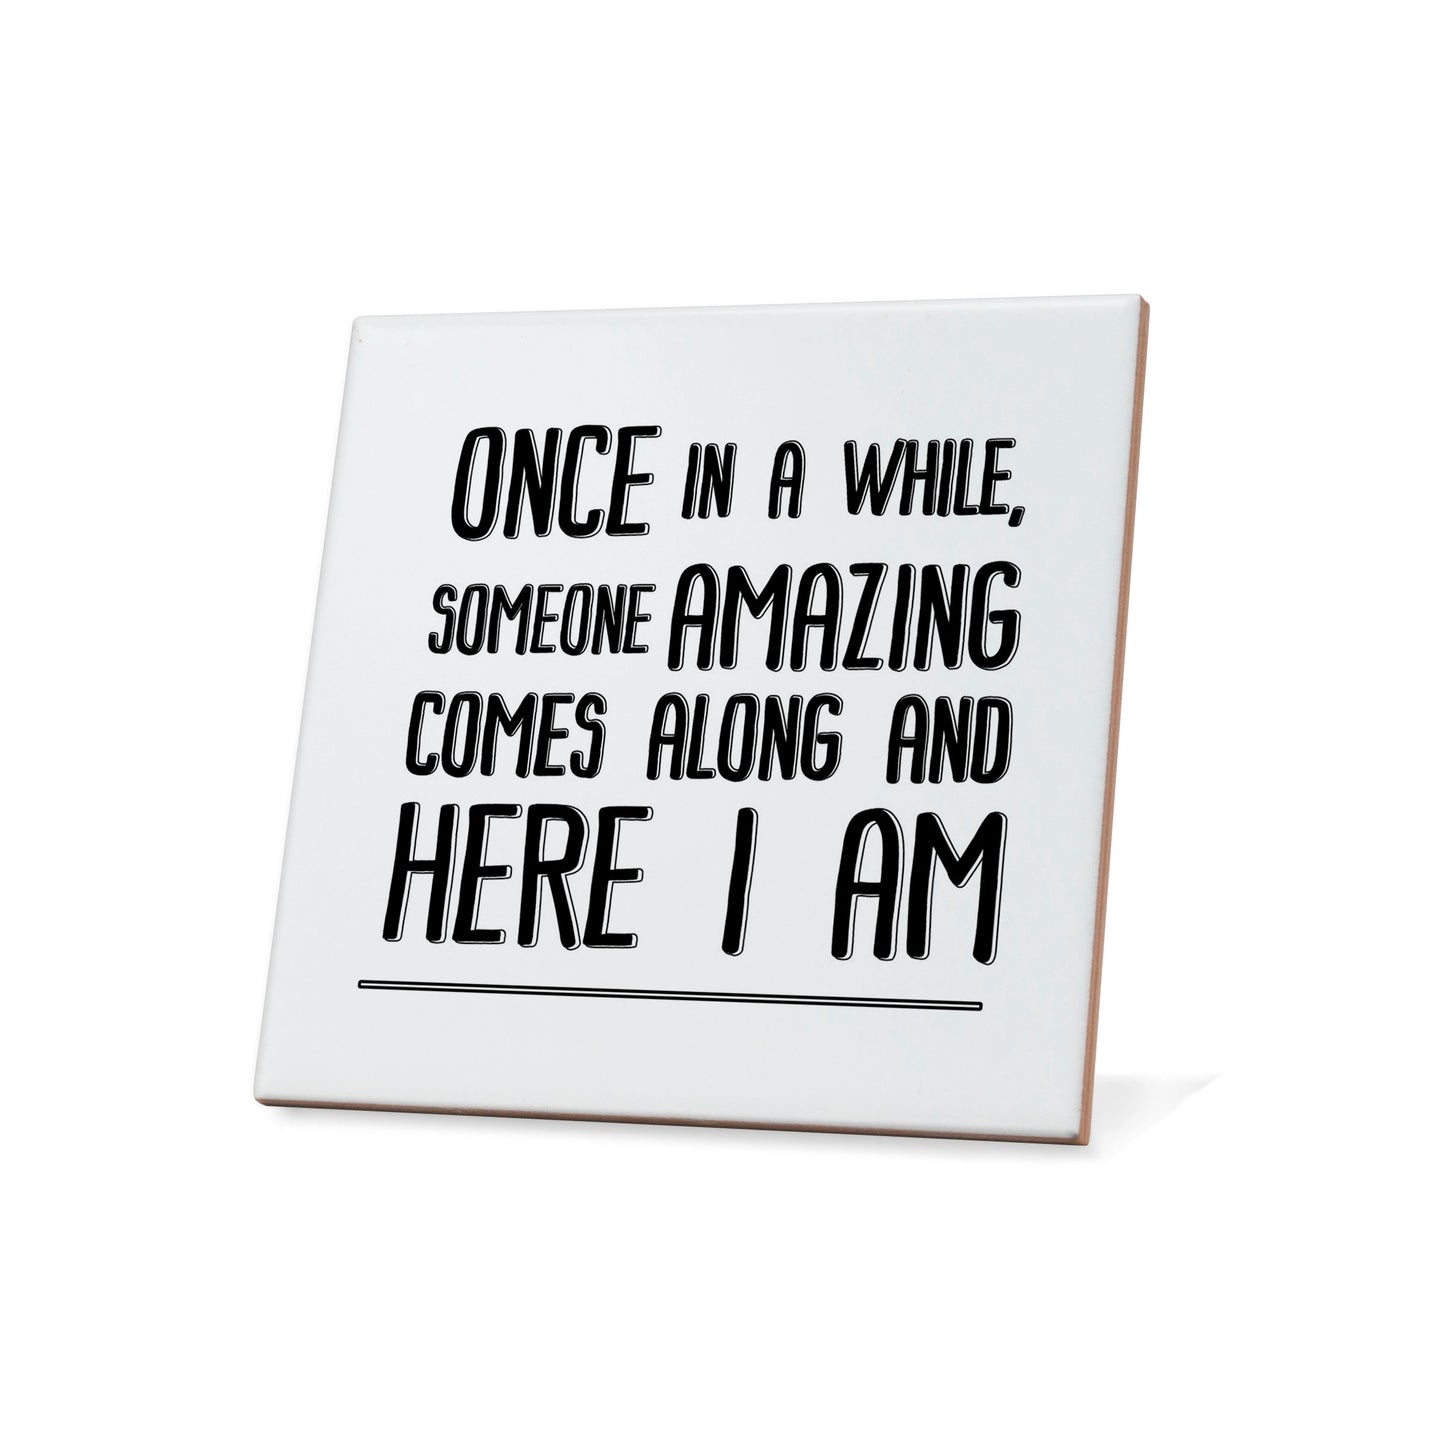 Once in a while, someone amazing comes along and here I am Quote Coaster